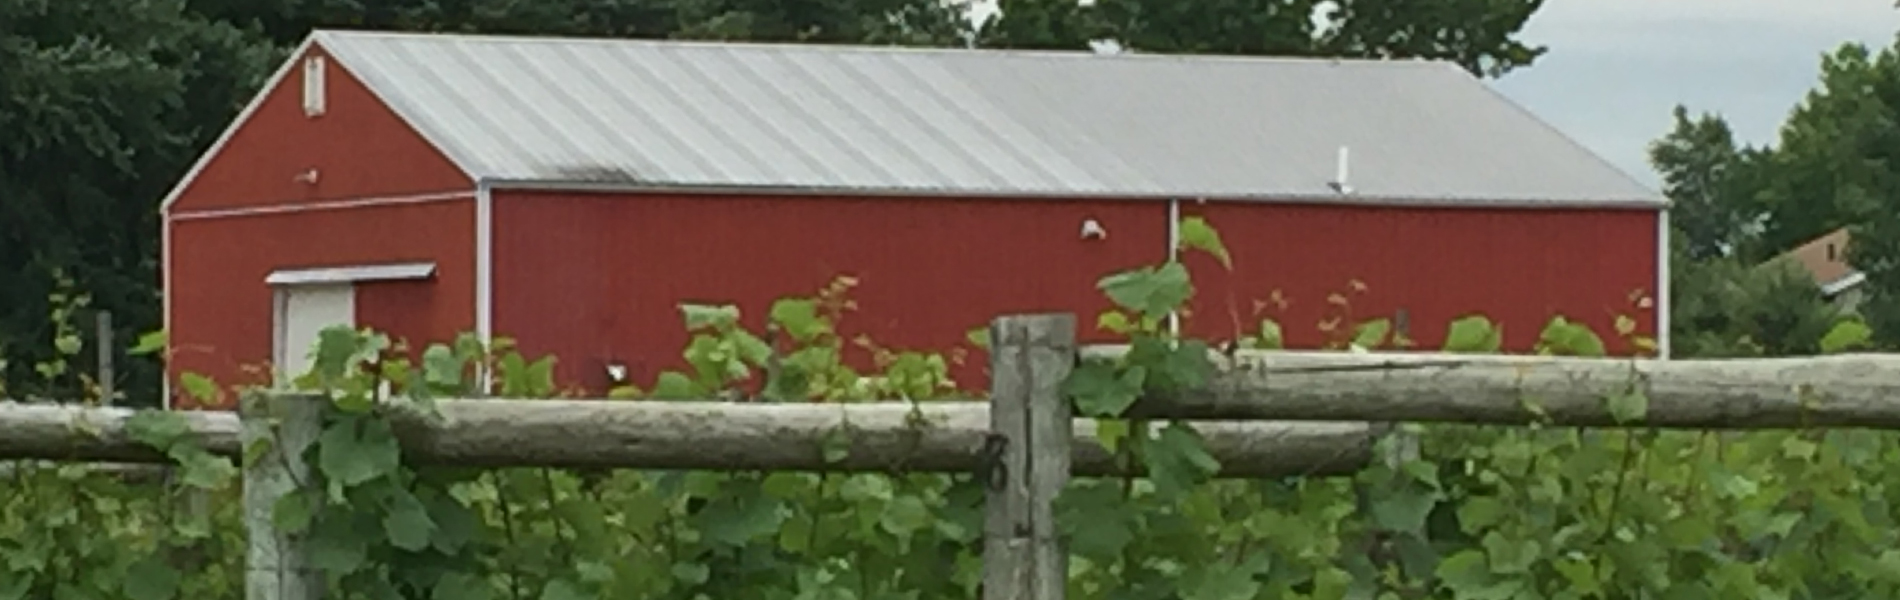 Monroeville Barn With Grape Vines